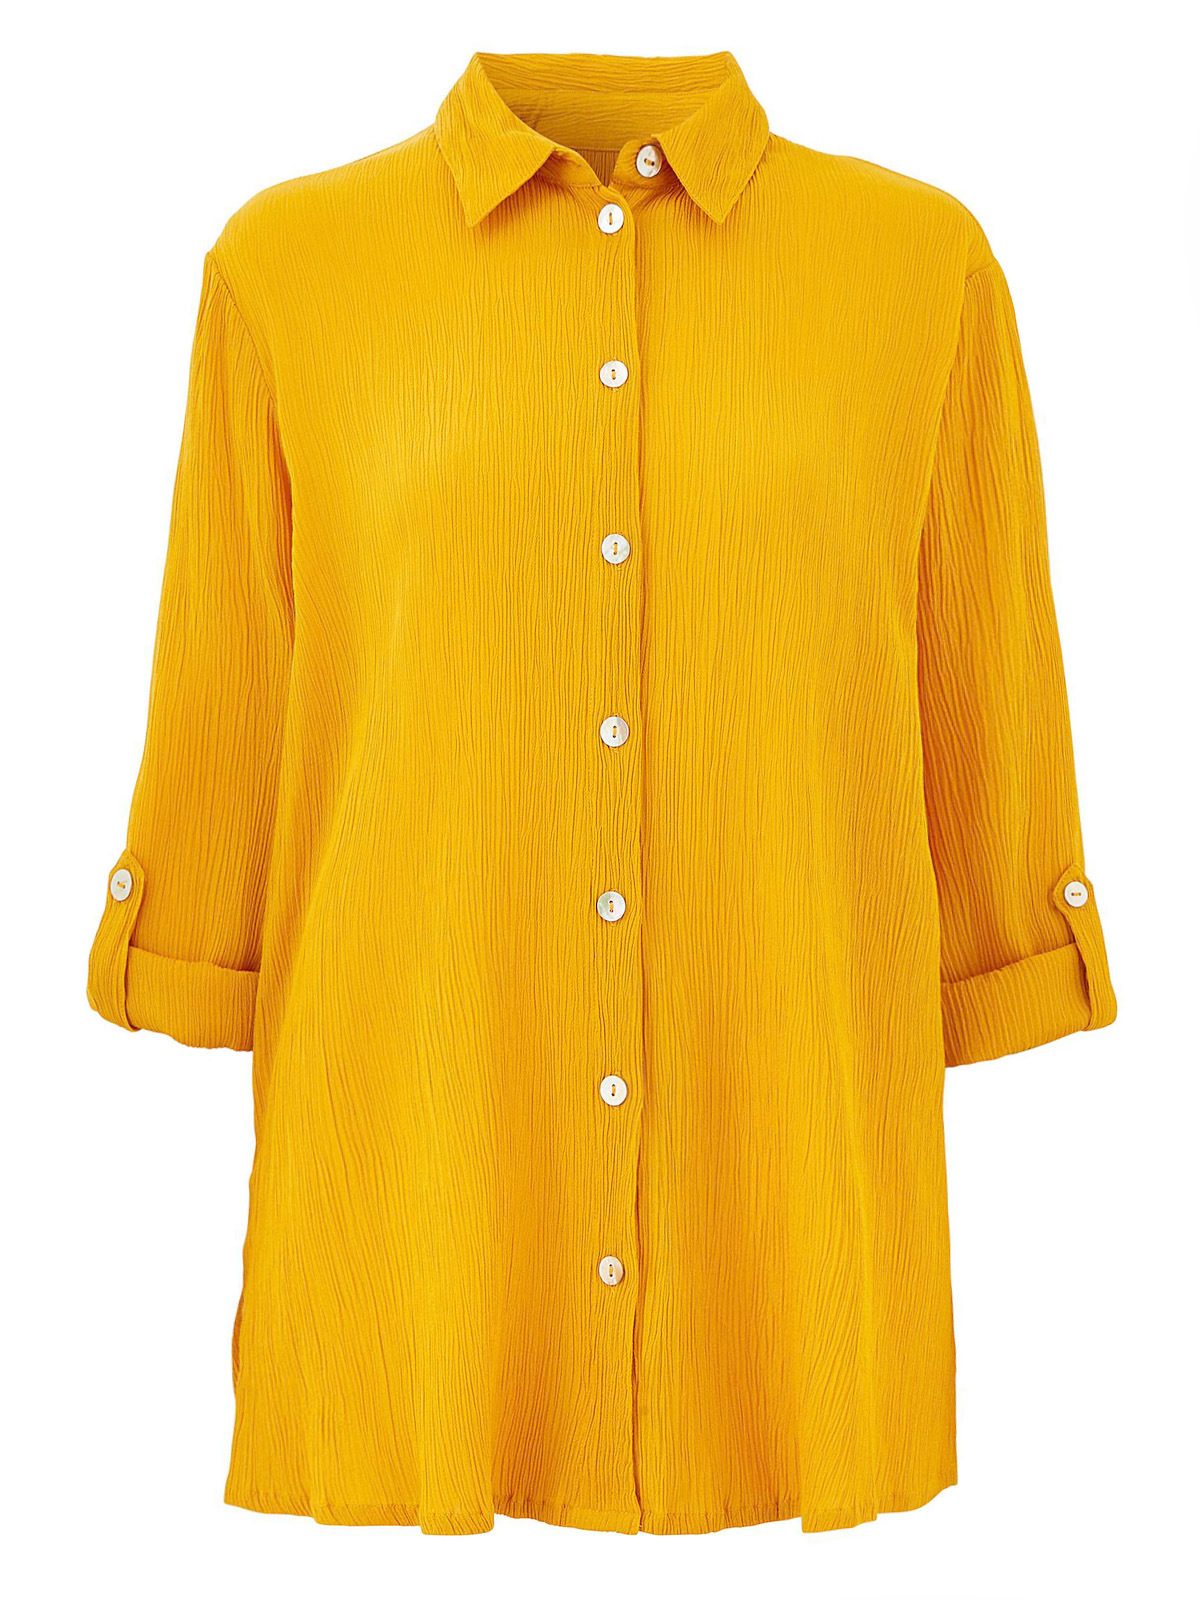 Capsule - - Capsule SAFFRON Crinkle Roll Sleeve Shirt - Plus Size 20 to 24